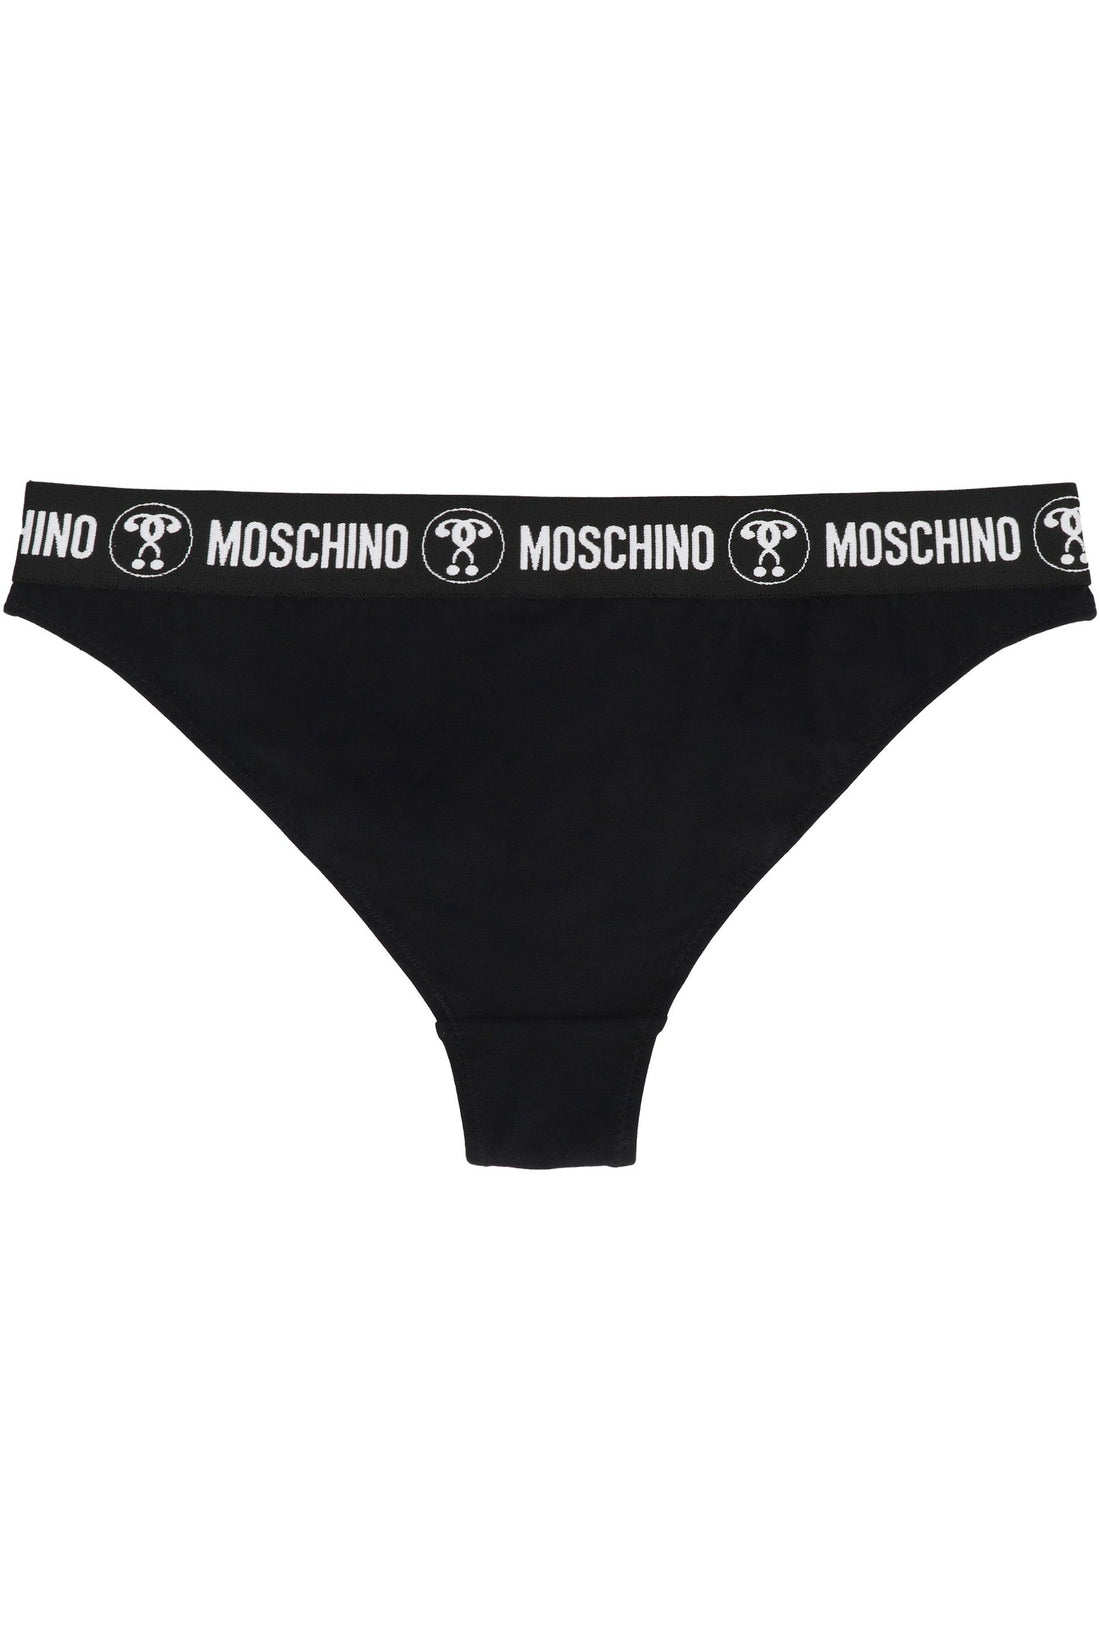 Moschino-OUTLET-SALE-Cotton briefs with elastic band-ARCHIVIST